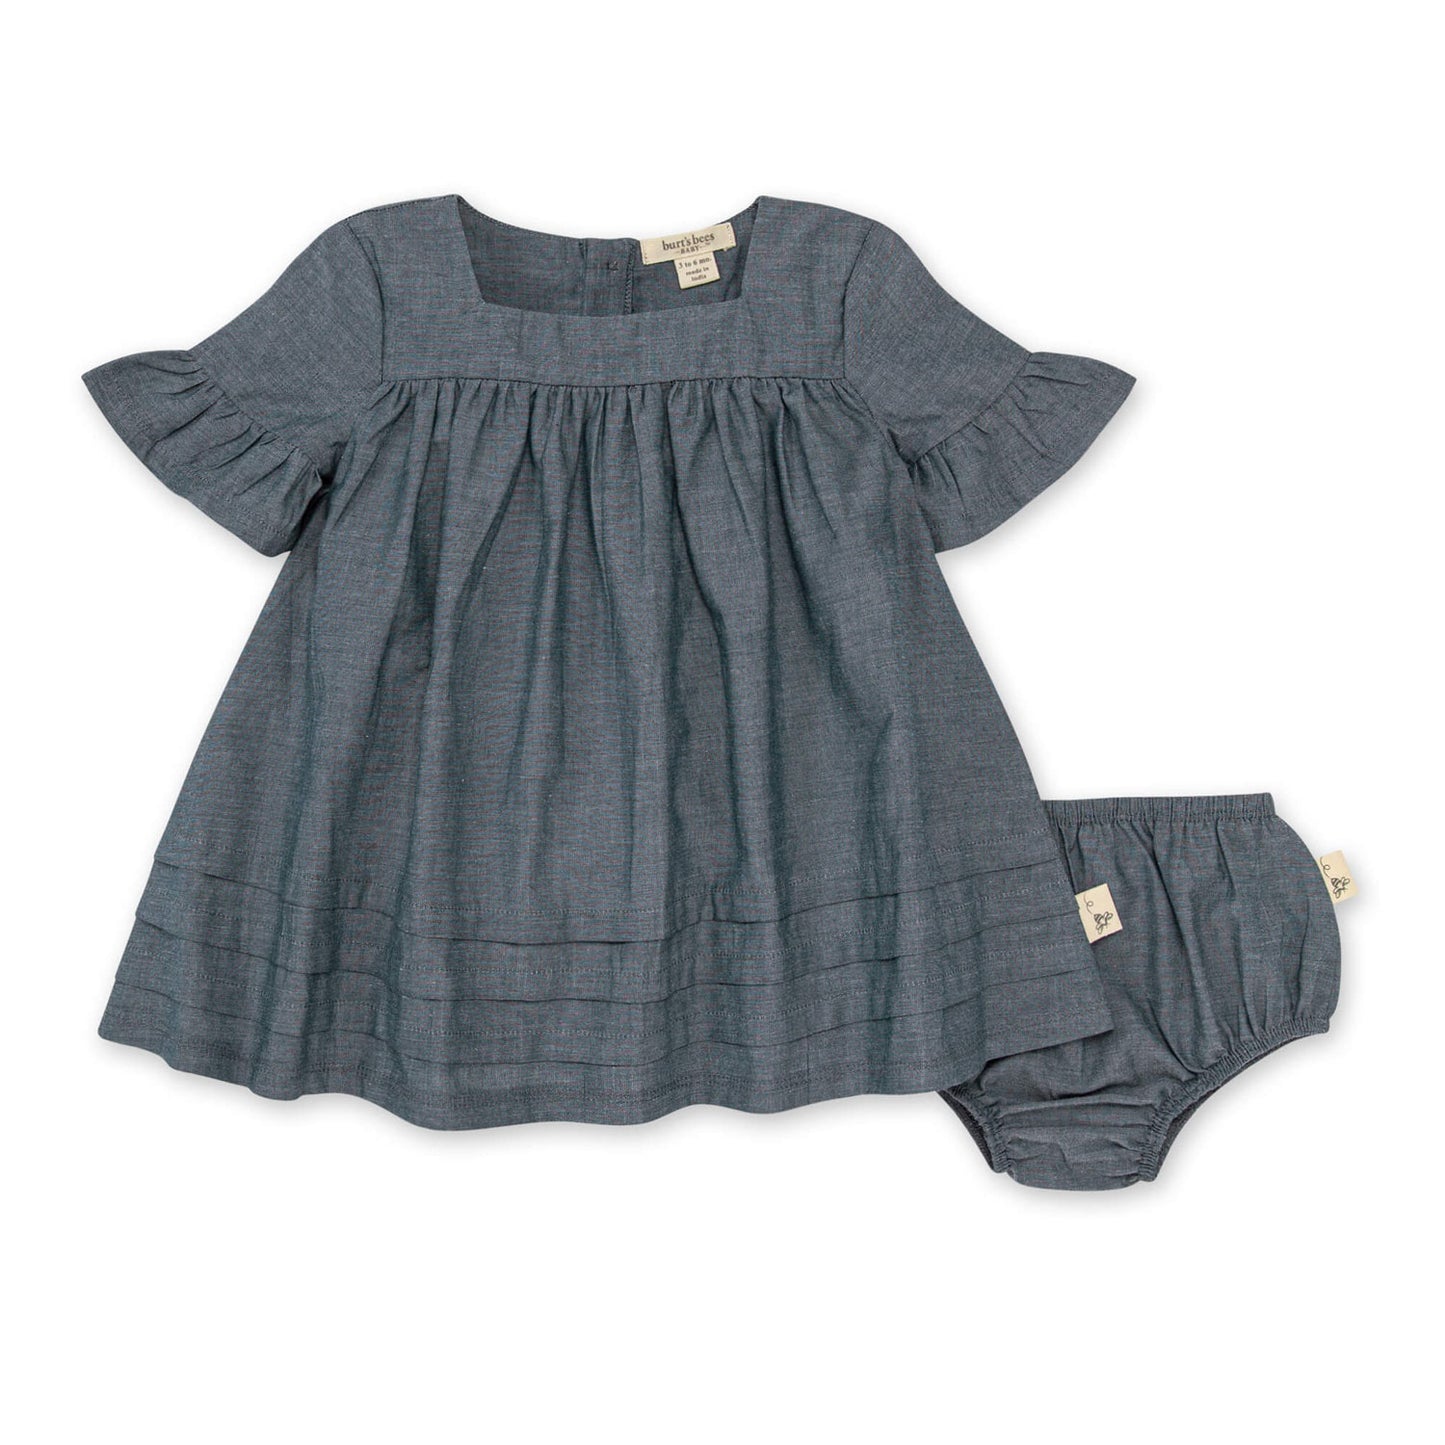 Burt's Bees Dress and Diaper Cover Set - Chambray